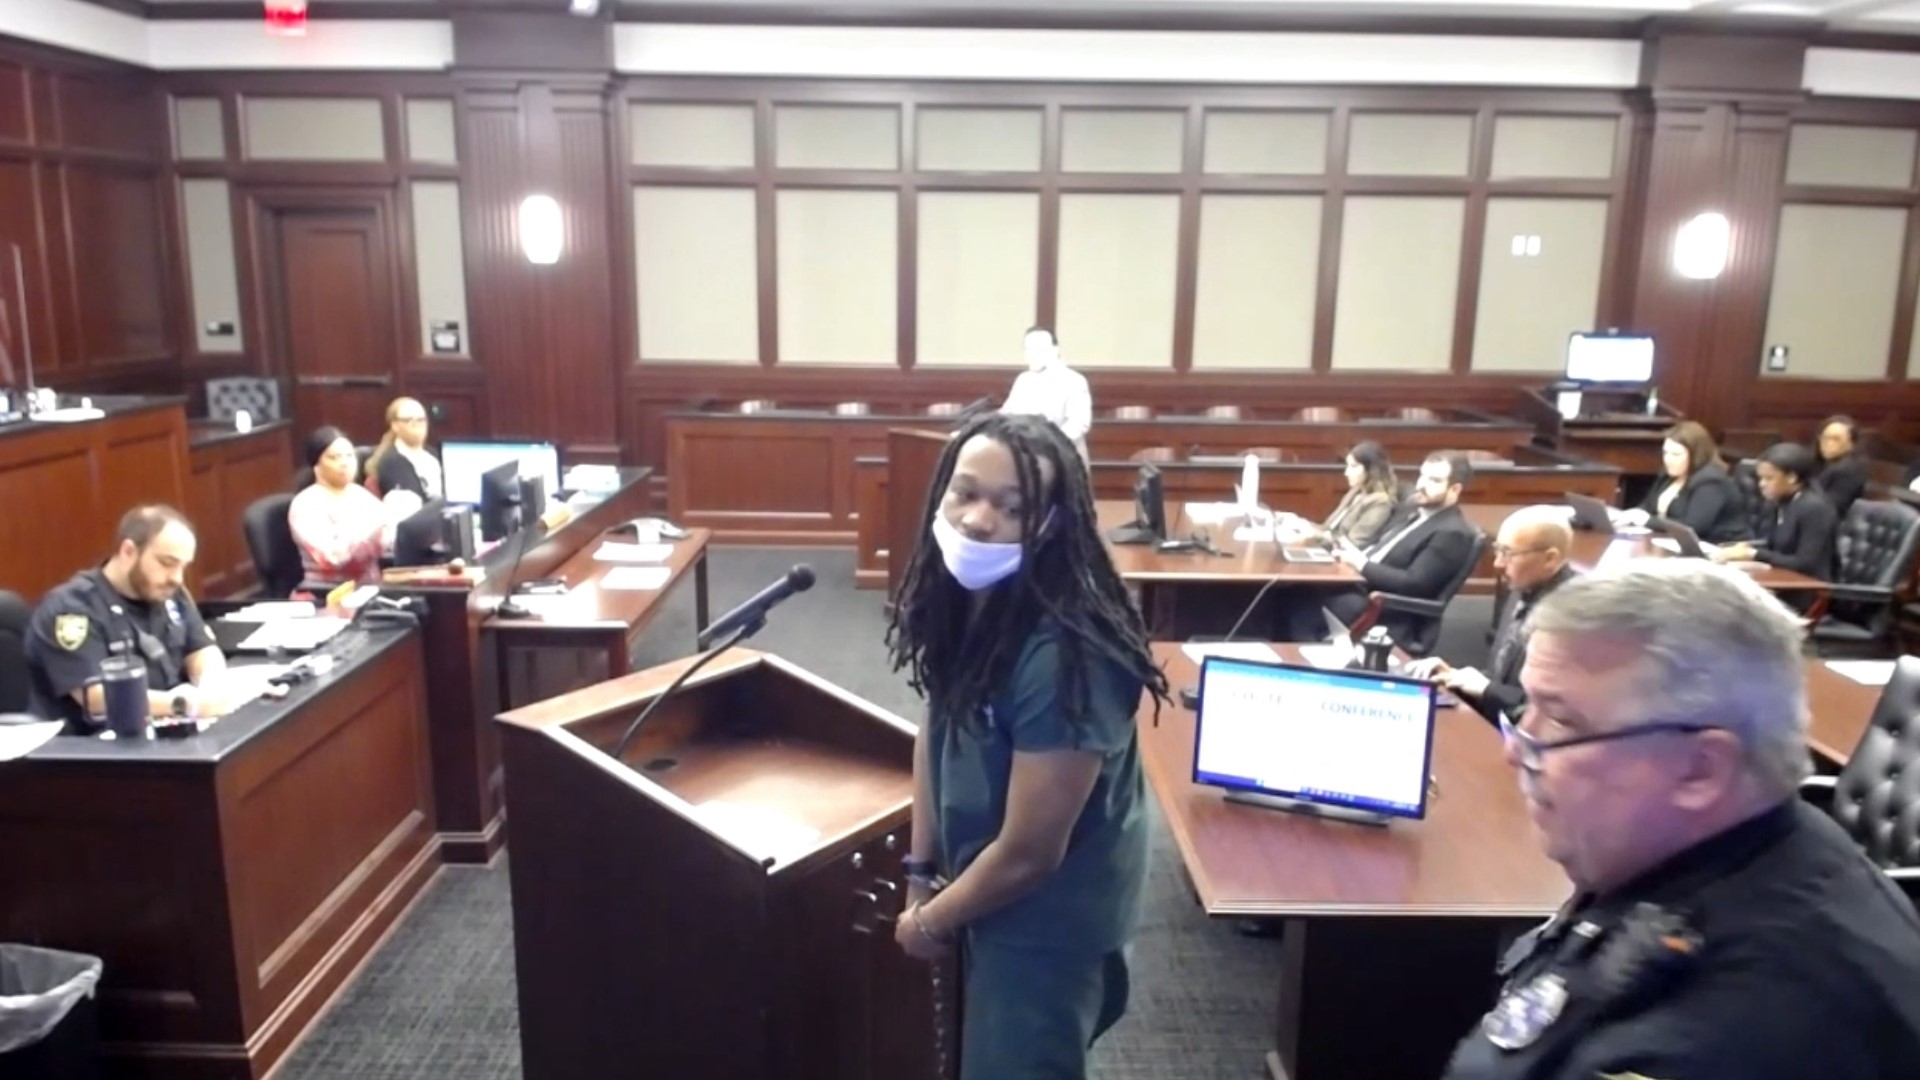 Hakeem Robinson, a Jacksonville rapper who goes by 'Ksoo,' appeared in Duval County court Thursday morning ahead of his upcoming murder trial in August.